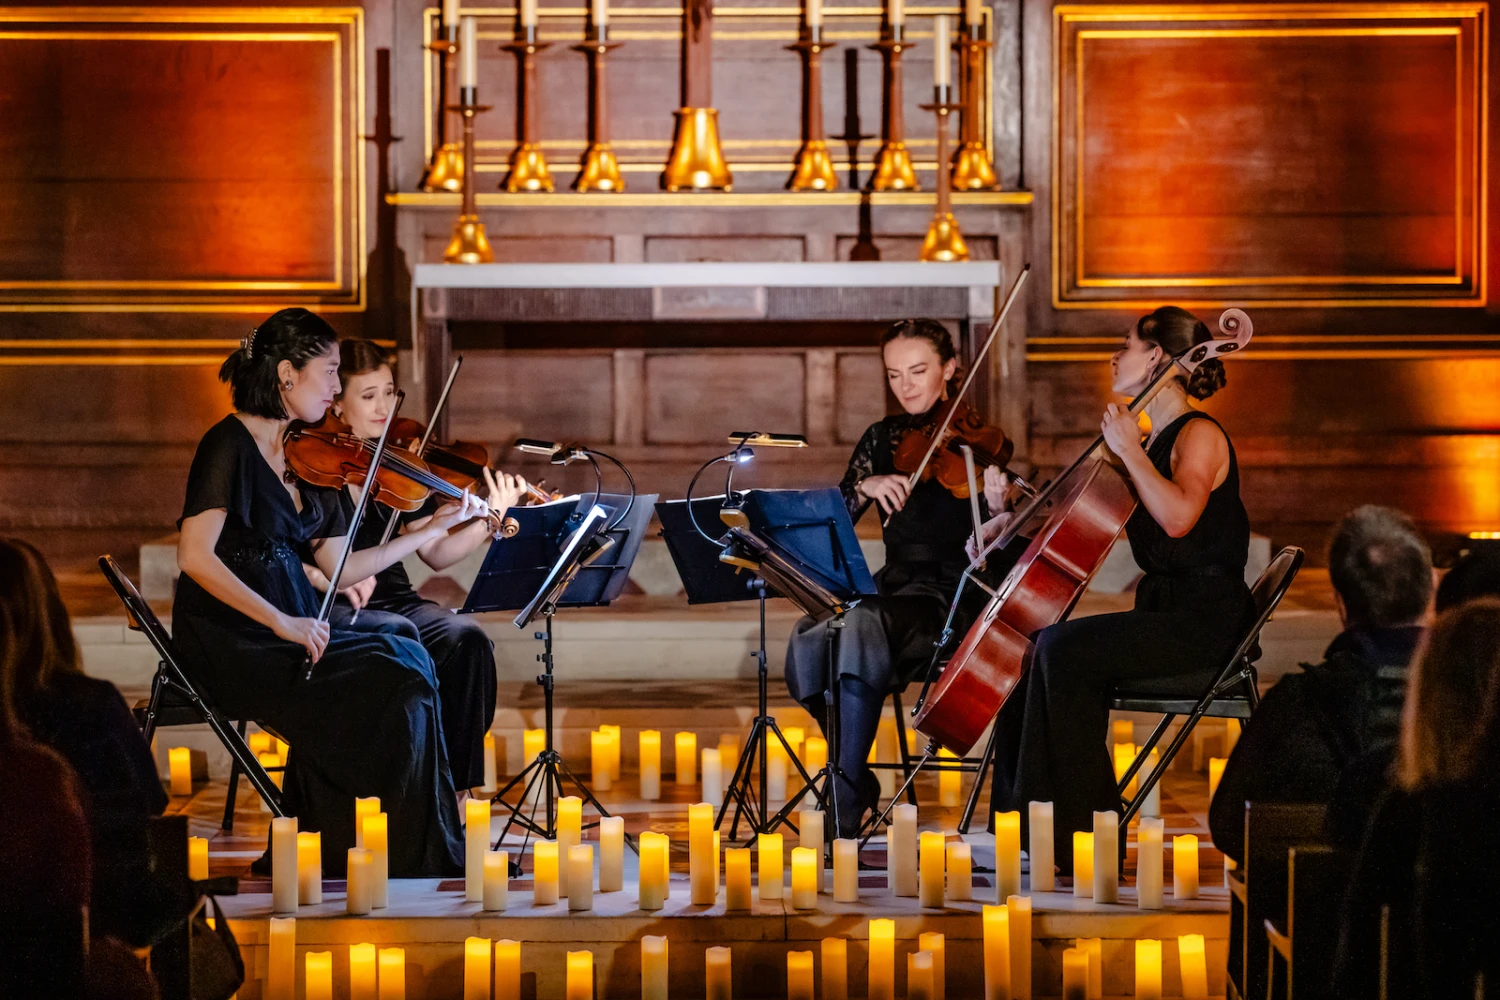 Christmas by Candlelight - St Giles-in-the-Fields: What to expect - 3